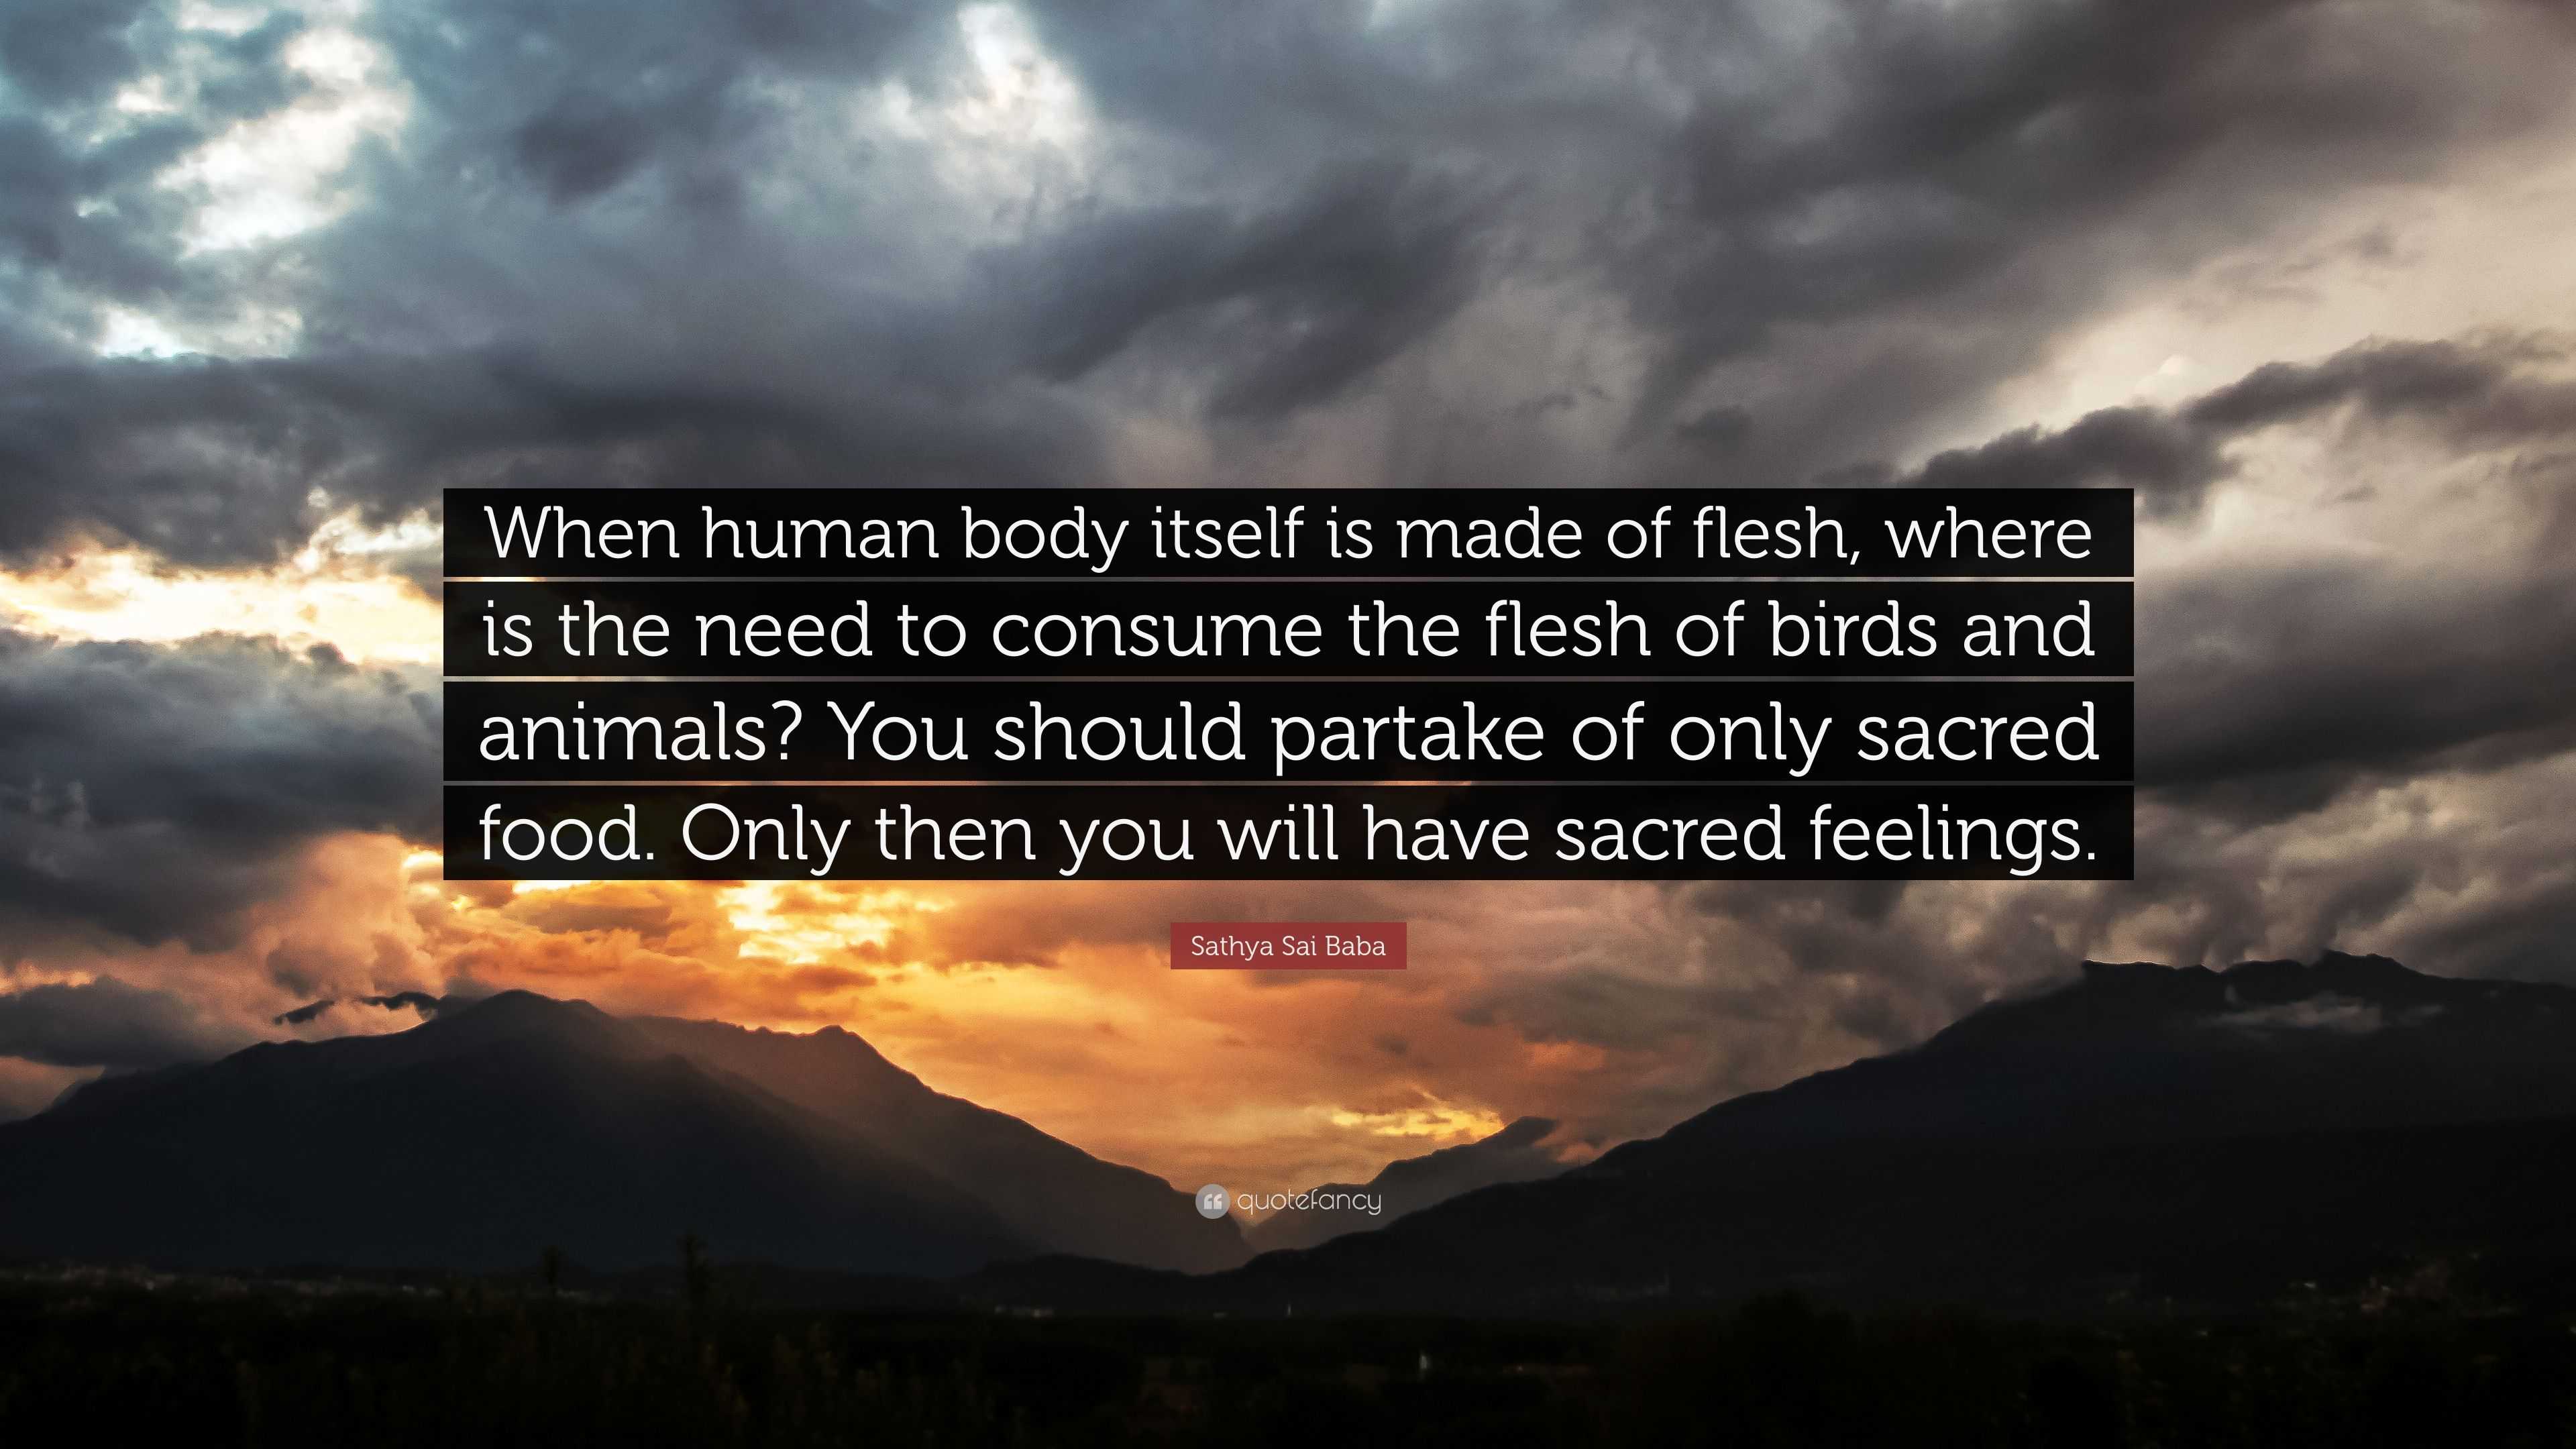 Sathya Sai Baba Quote: “When human body itself is made of flesh, where is  the need to consume the flesh of birds and animals? You should partake...”